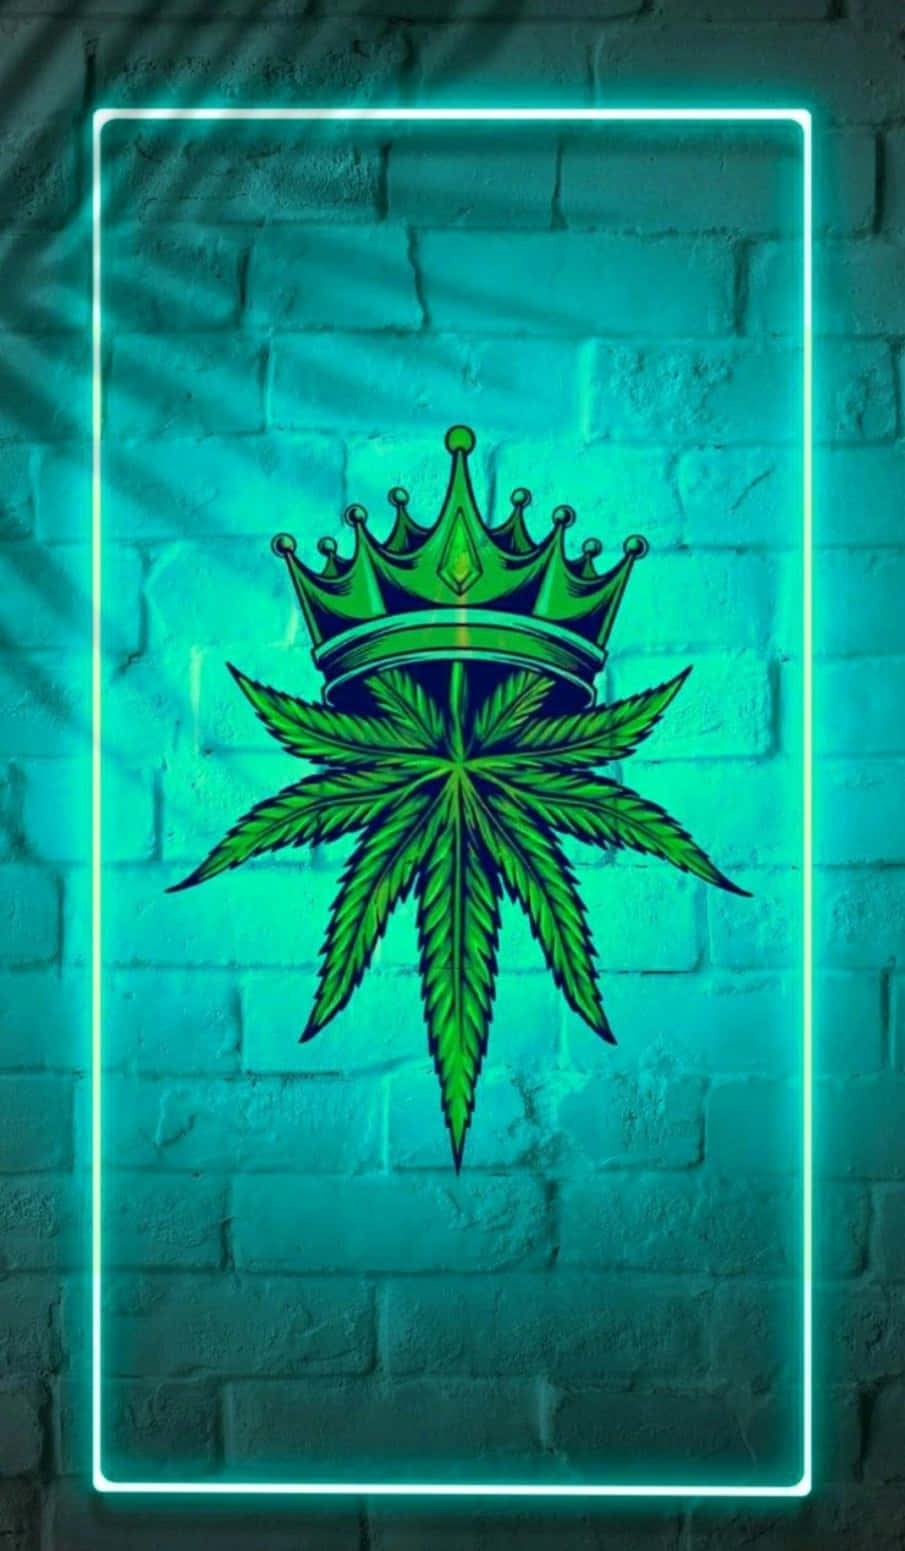 Usher in the weekend with some dope shit and dank weed! Wallpaper